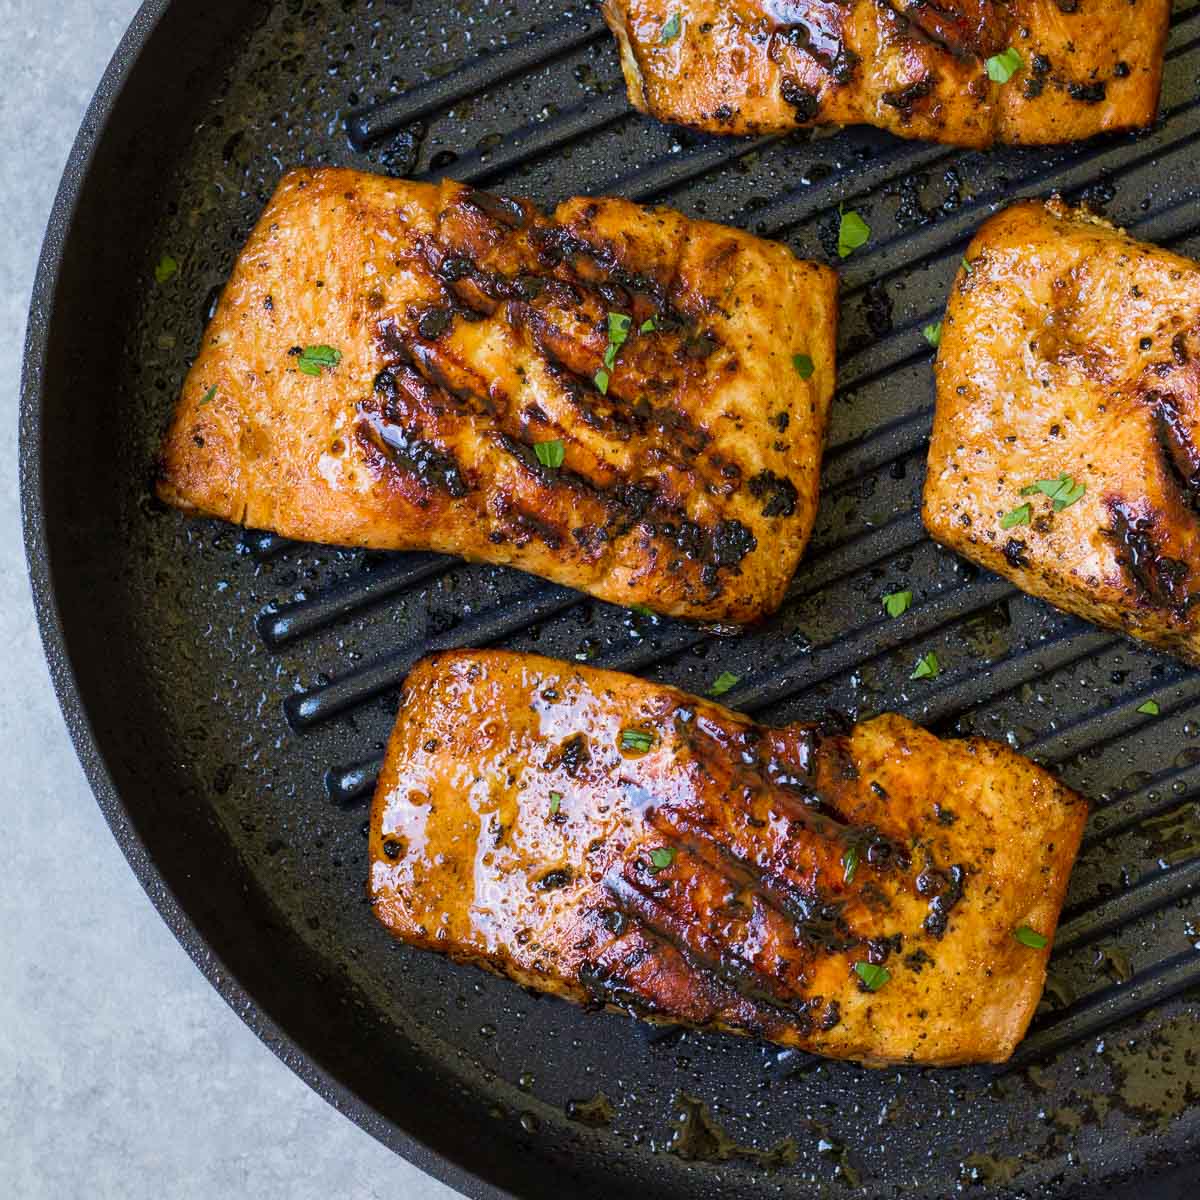 How To Grill Salmon Without Skin On Charcoal Grill